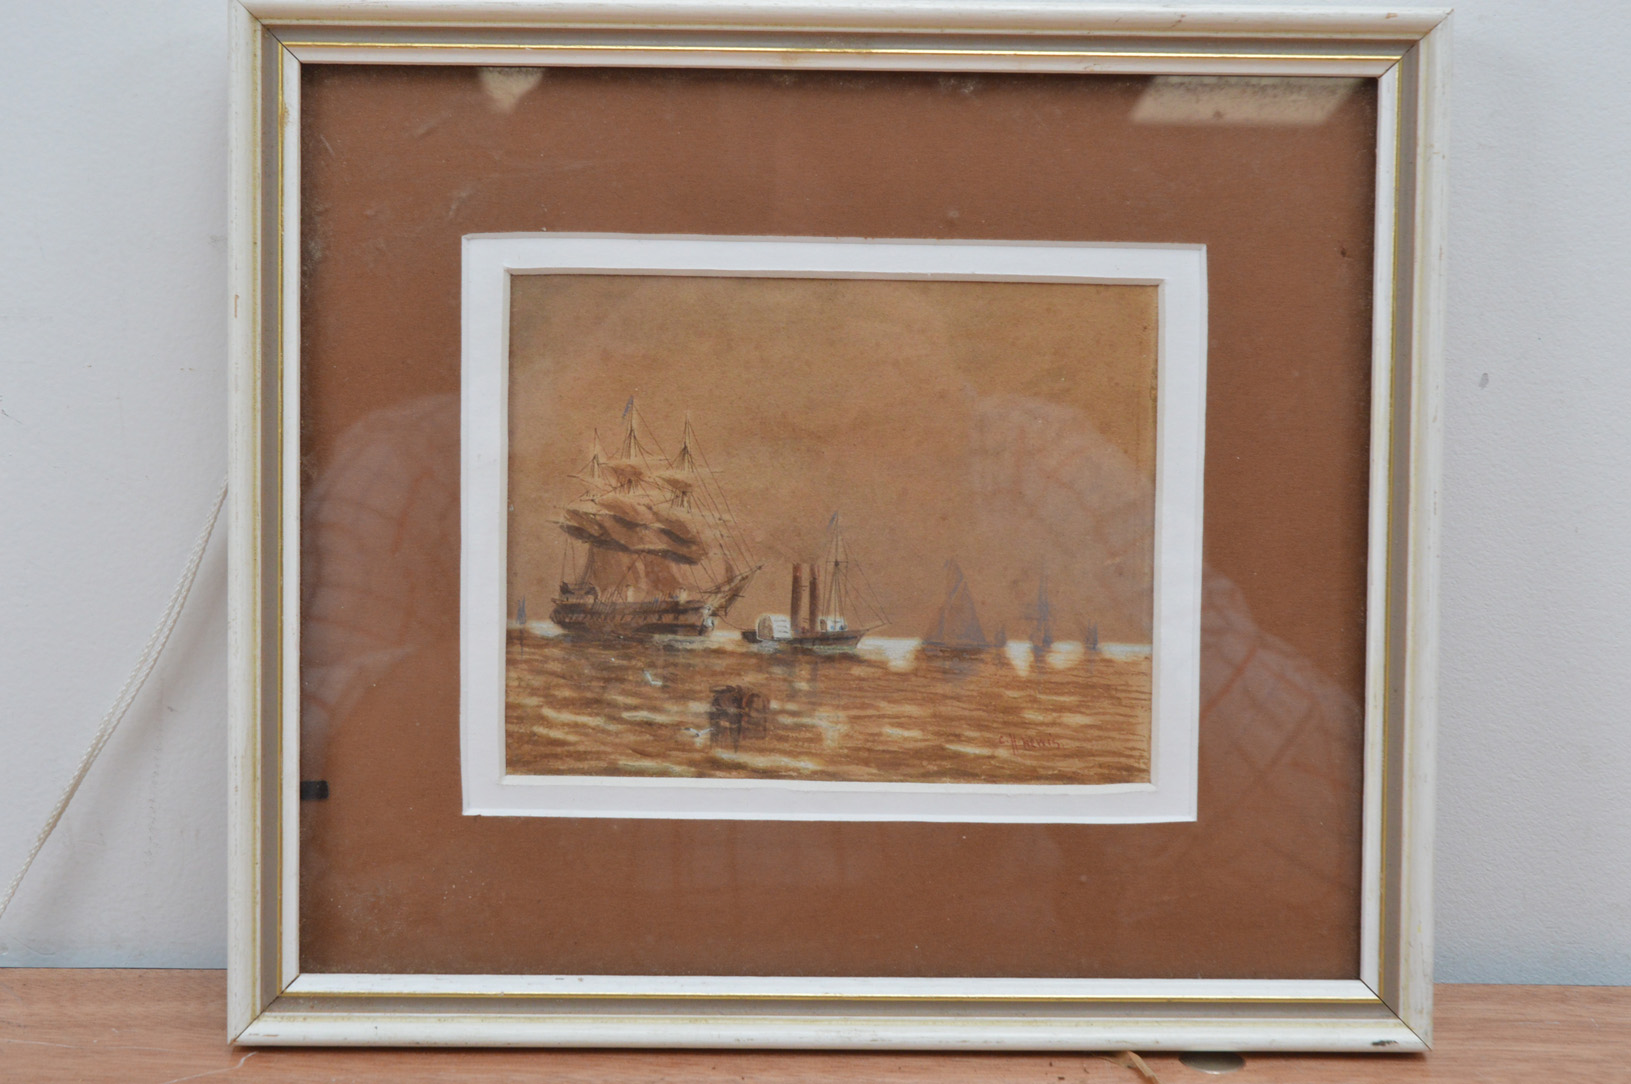 Charles H Lewis (British 20th century), ships at sea, watercolour on paper, signed bottom right, a